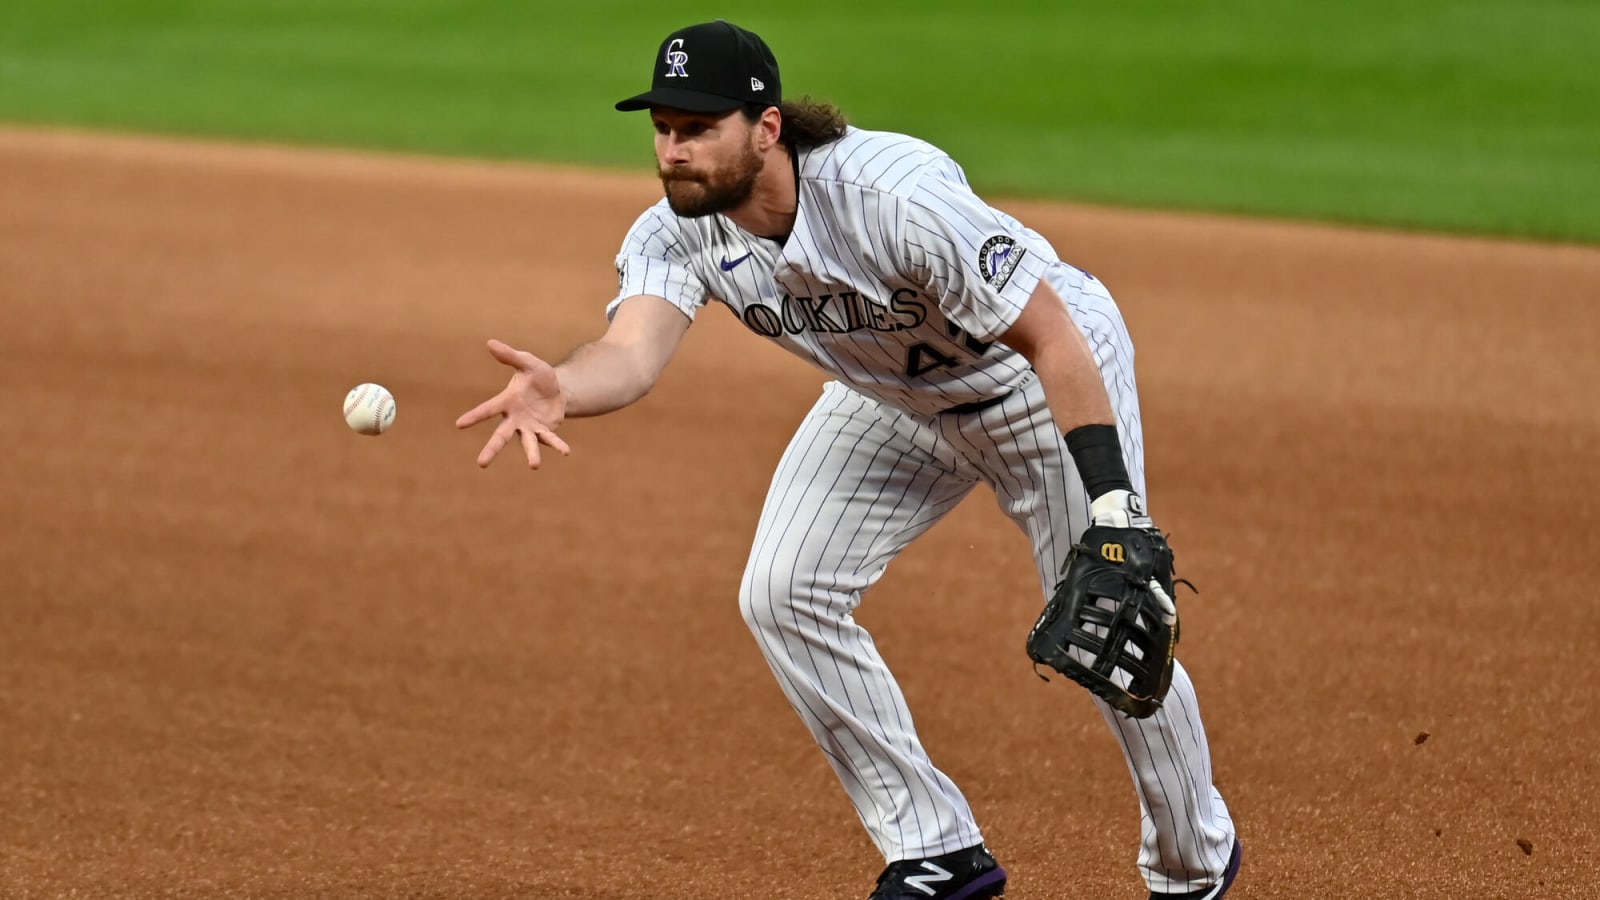 Daniel Murphy Signed With Angels Because He ‘Had A Little Bit Of Baseball Left’